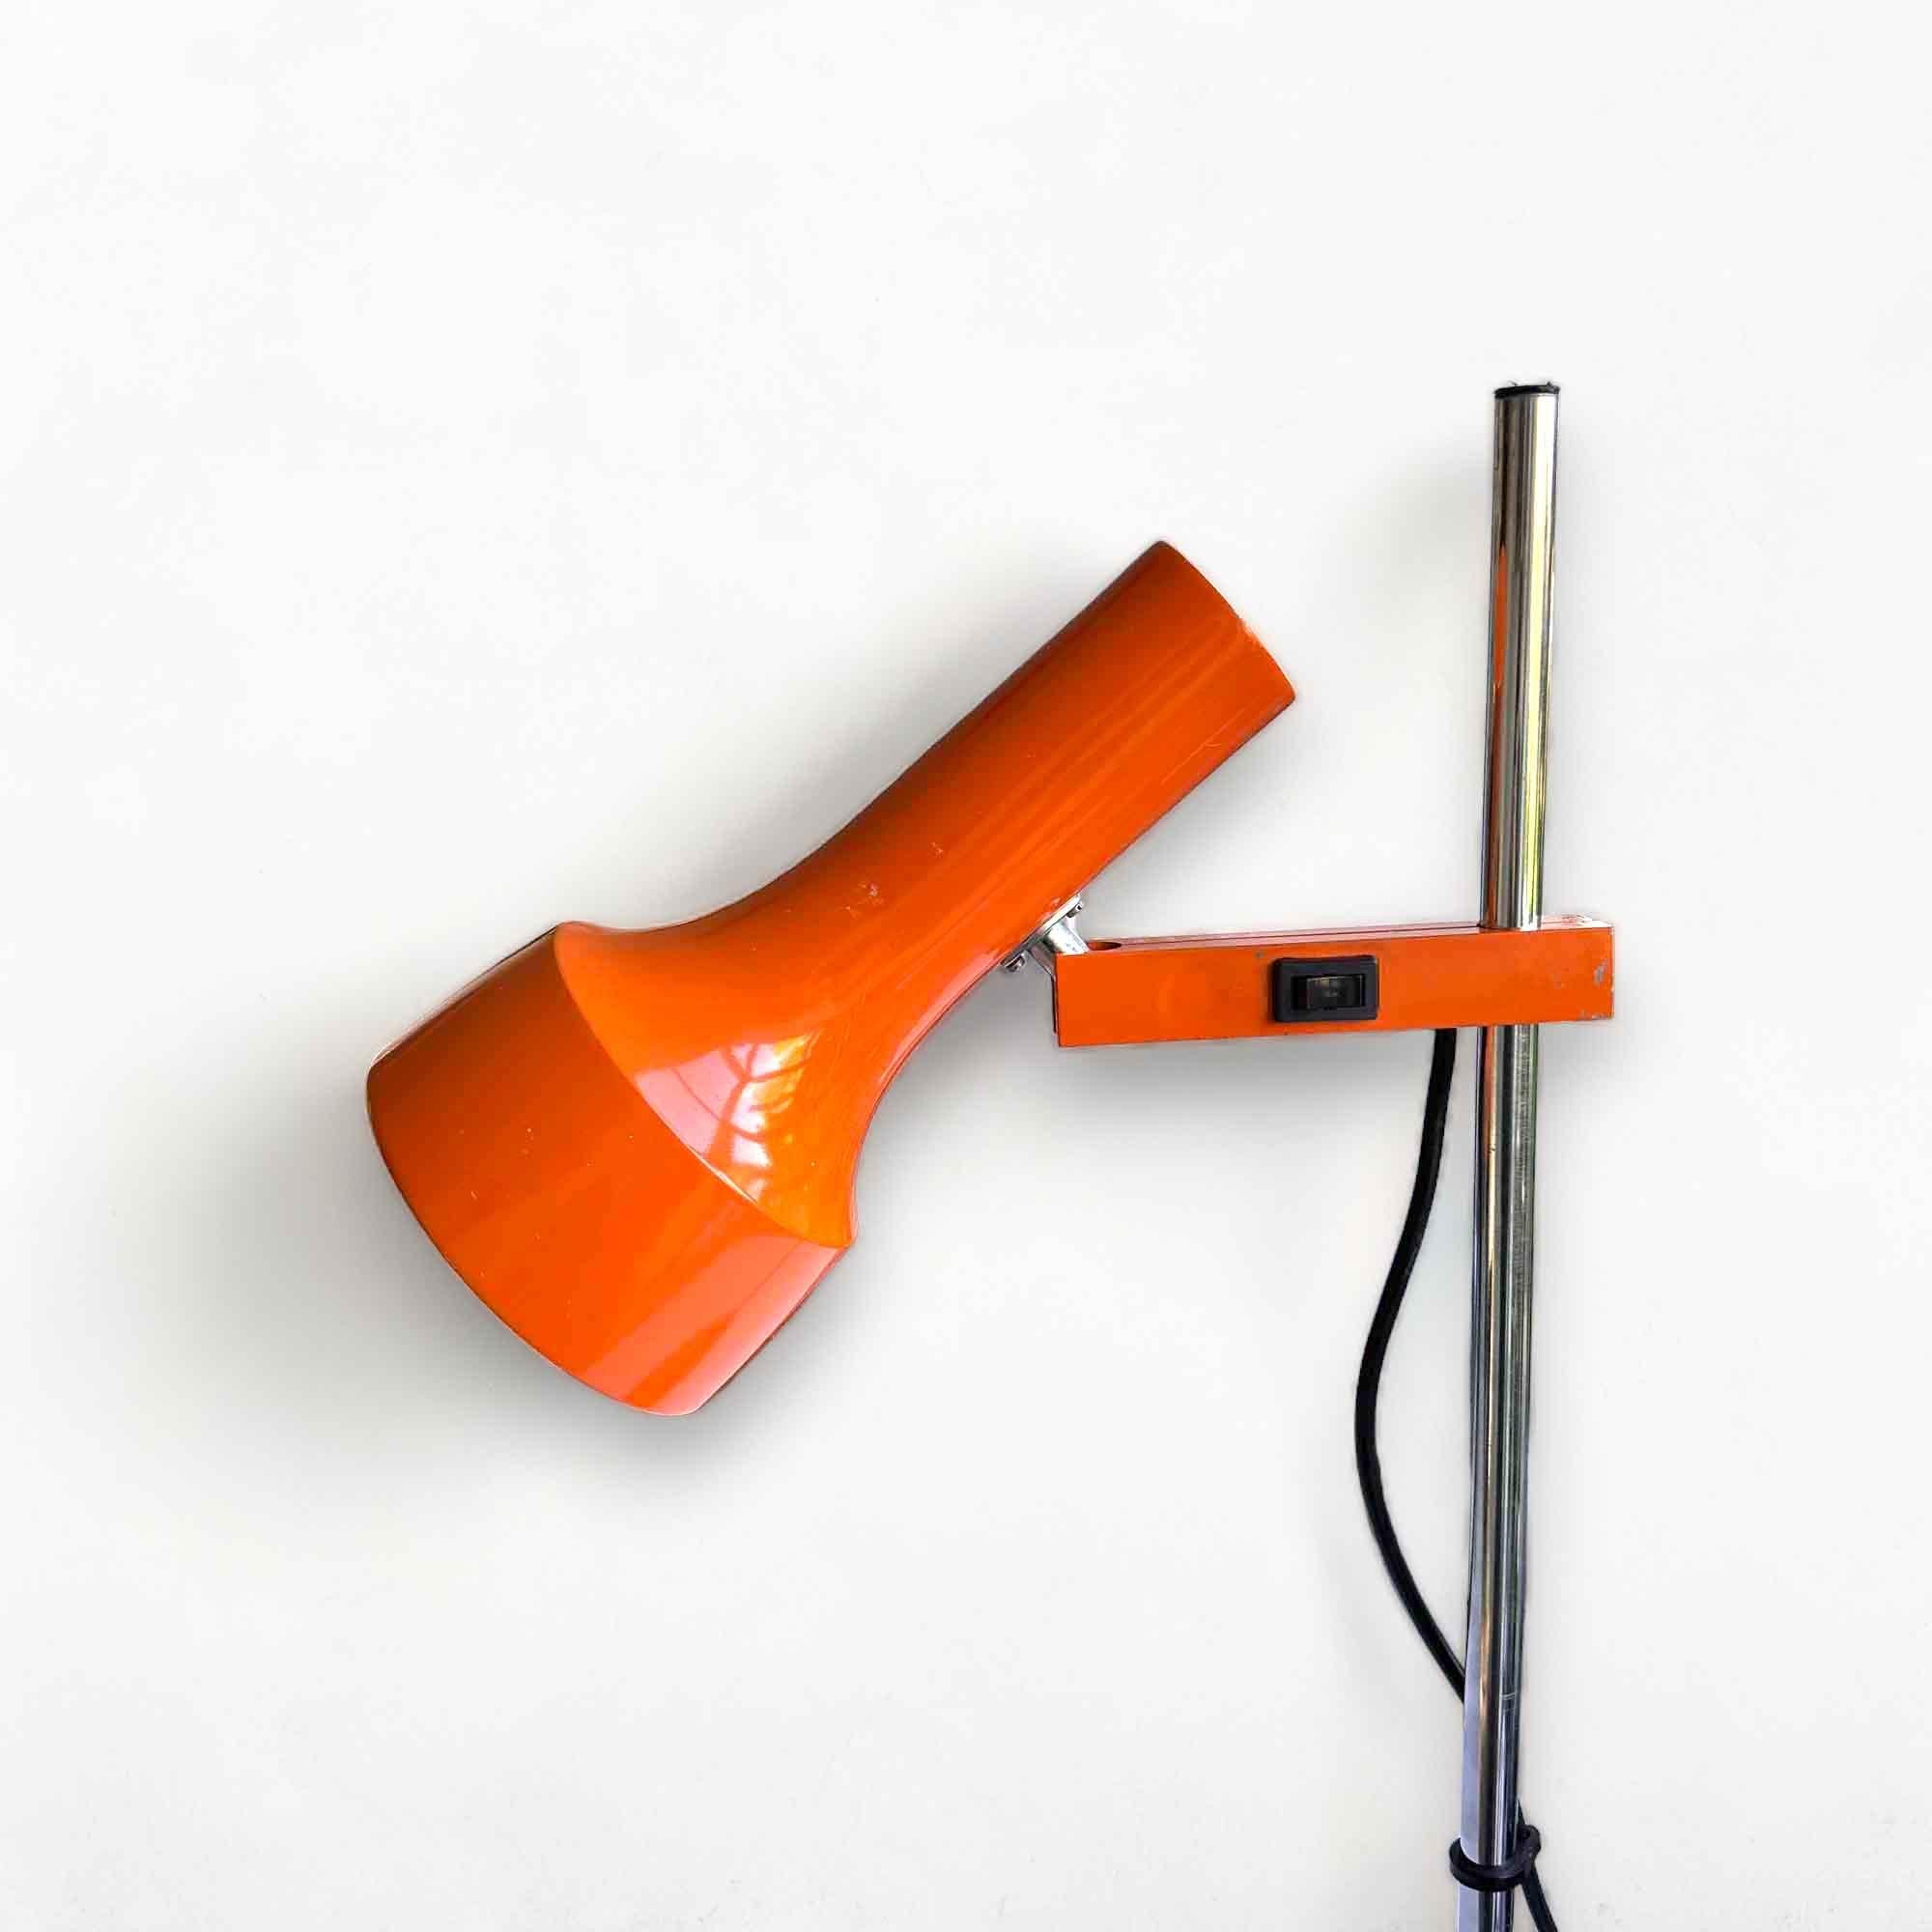 Orange space-age desk lamp from Kaiser Leuchten. This lamp can be adjusted in height and the shade can rotate, ensuring optimal light. The shade and base show light wear & tear. The chrome is in good condition. The lamp has been rewired.

Germany,